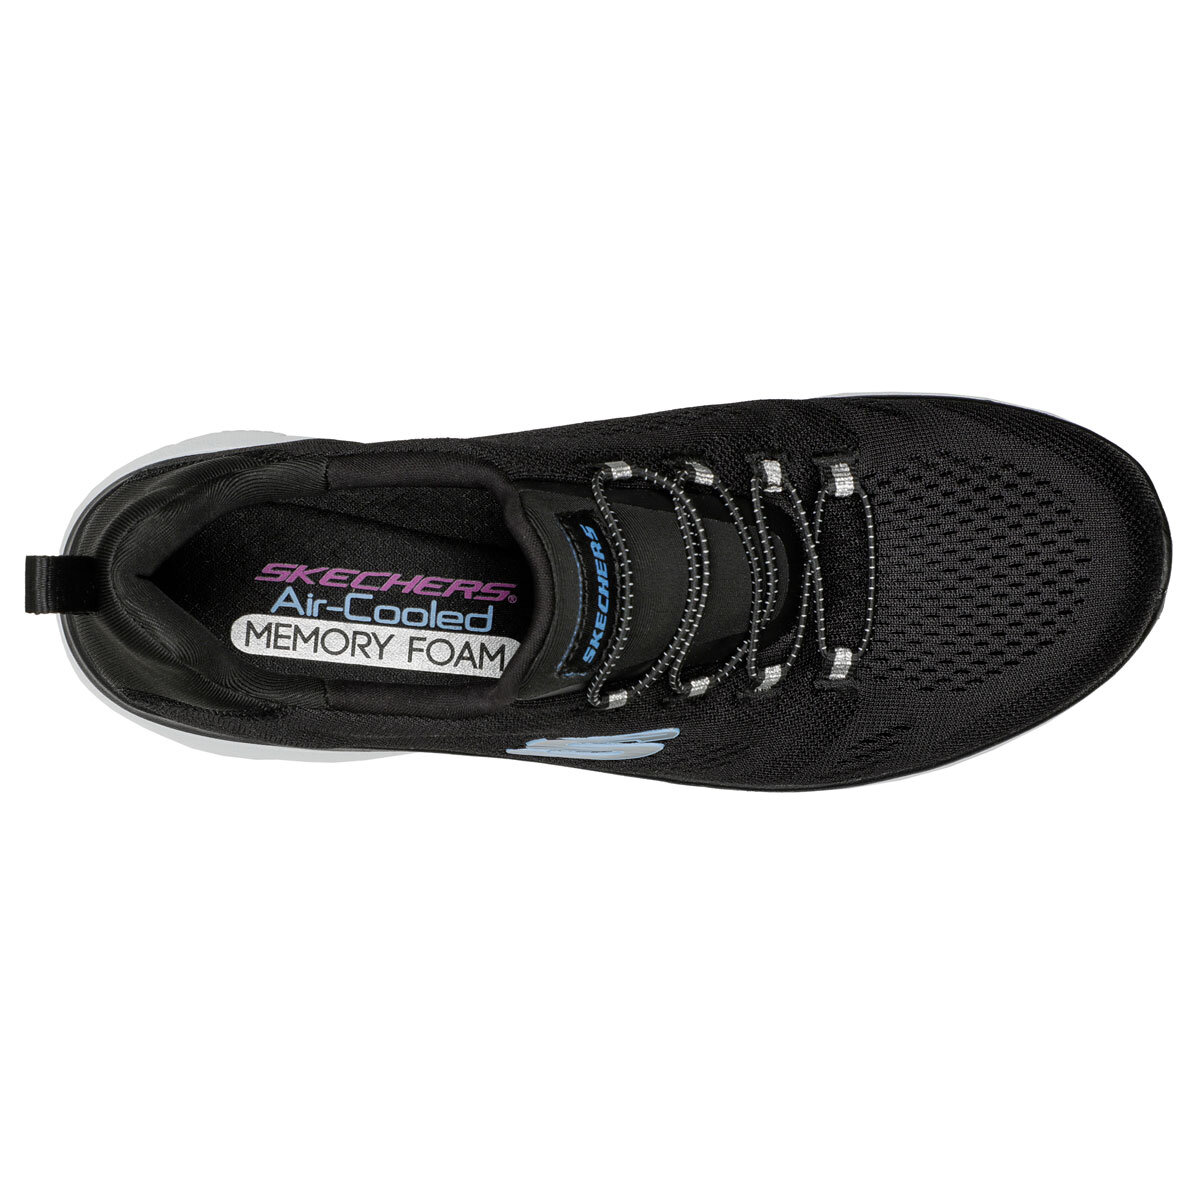 Skechers Ladies Lite Foam in 2 Colours and 7 Sizes